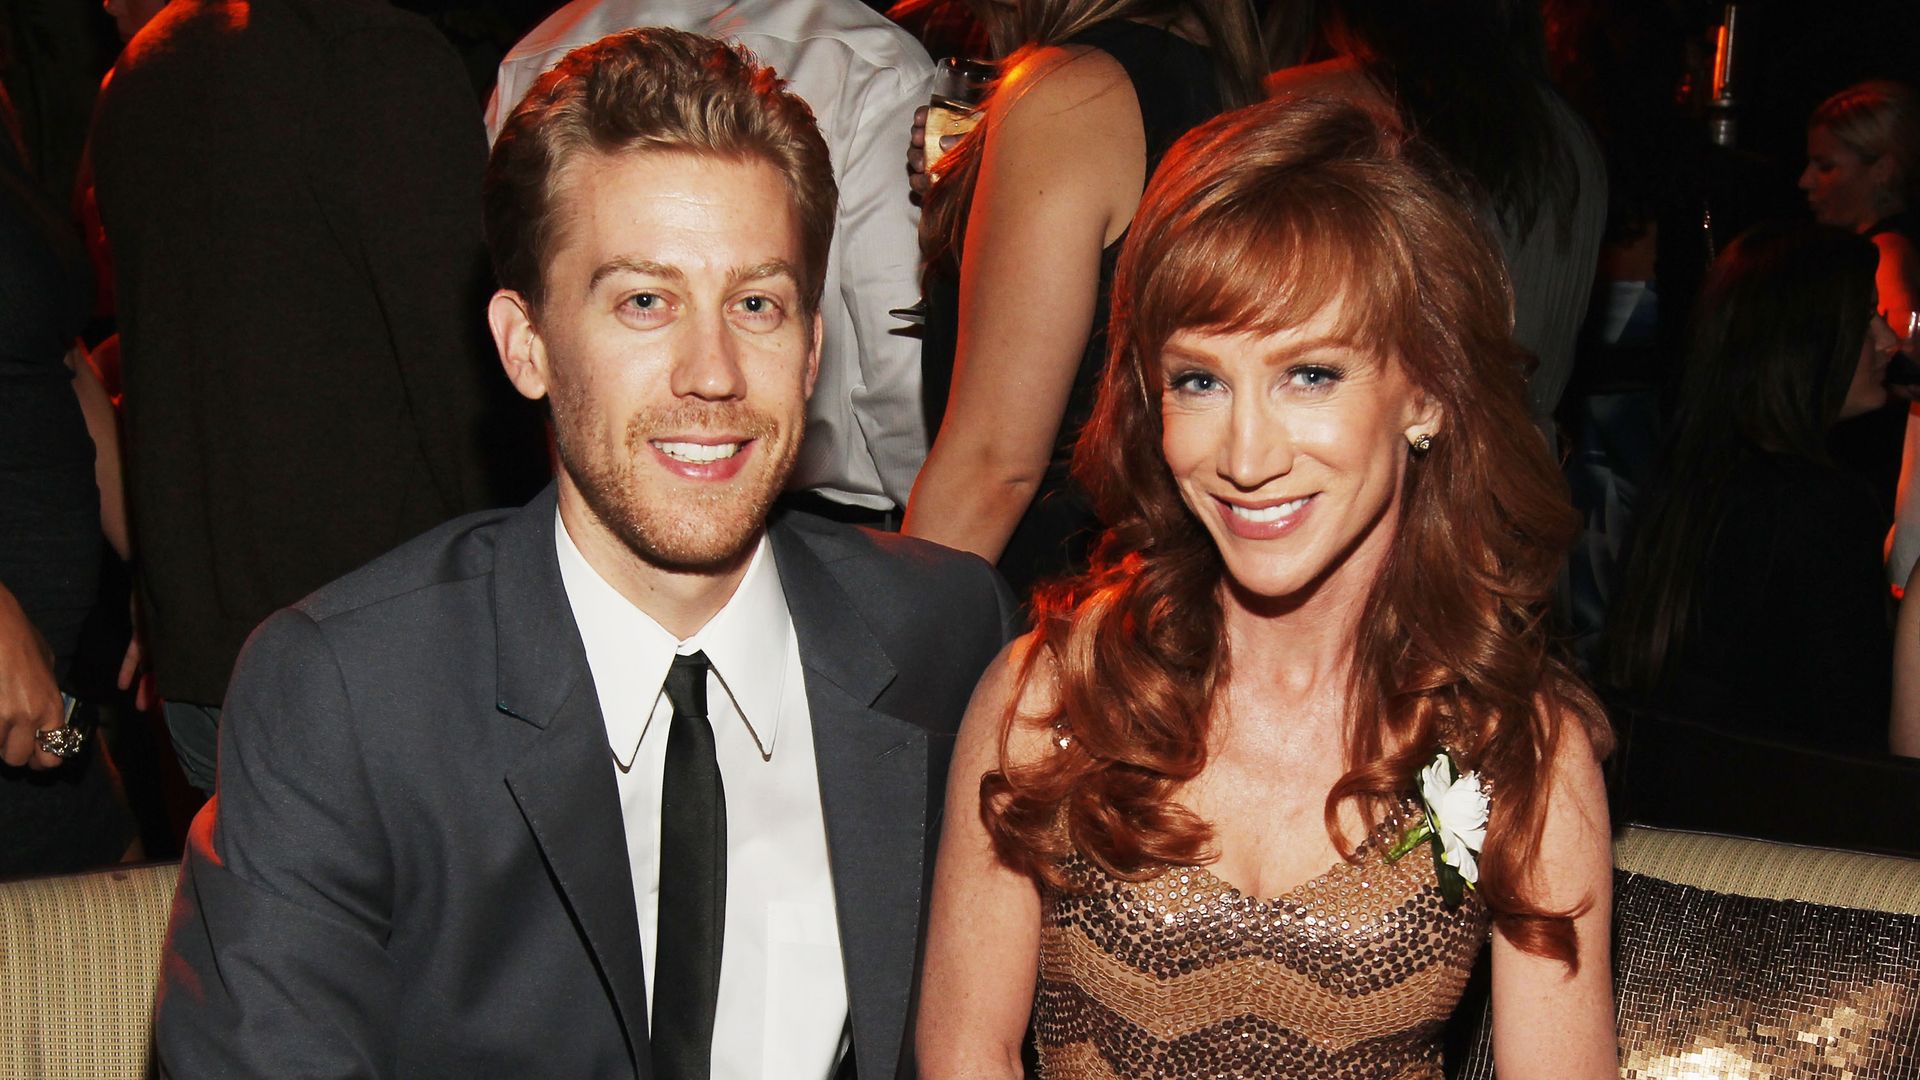 Kathy Griffin and Randy Bick attend The 2011 Entertainment Weekly And Women In Film Pre-Emmy Party Sponsored By L'Oreal at BOA Steakhouse on September 16, 2011 